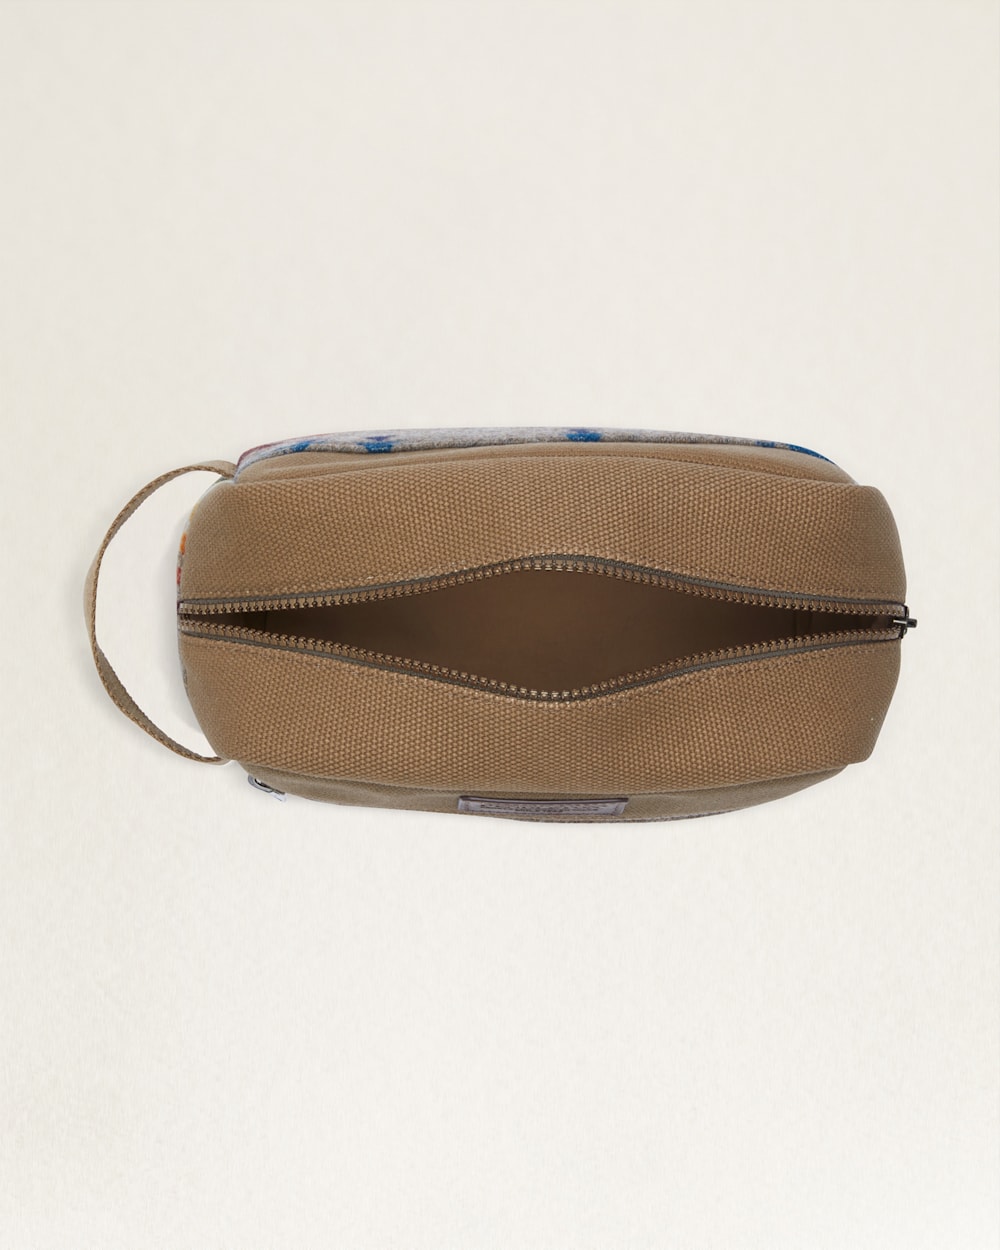 ALTERNATE VIEW OF HIGHLAND PEAK CARRYALL POUCH IN TAN MULTI image number 3